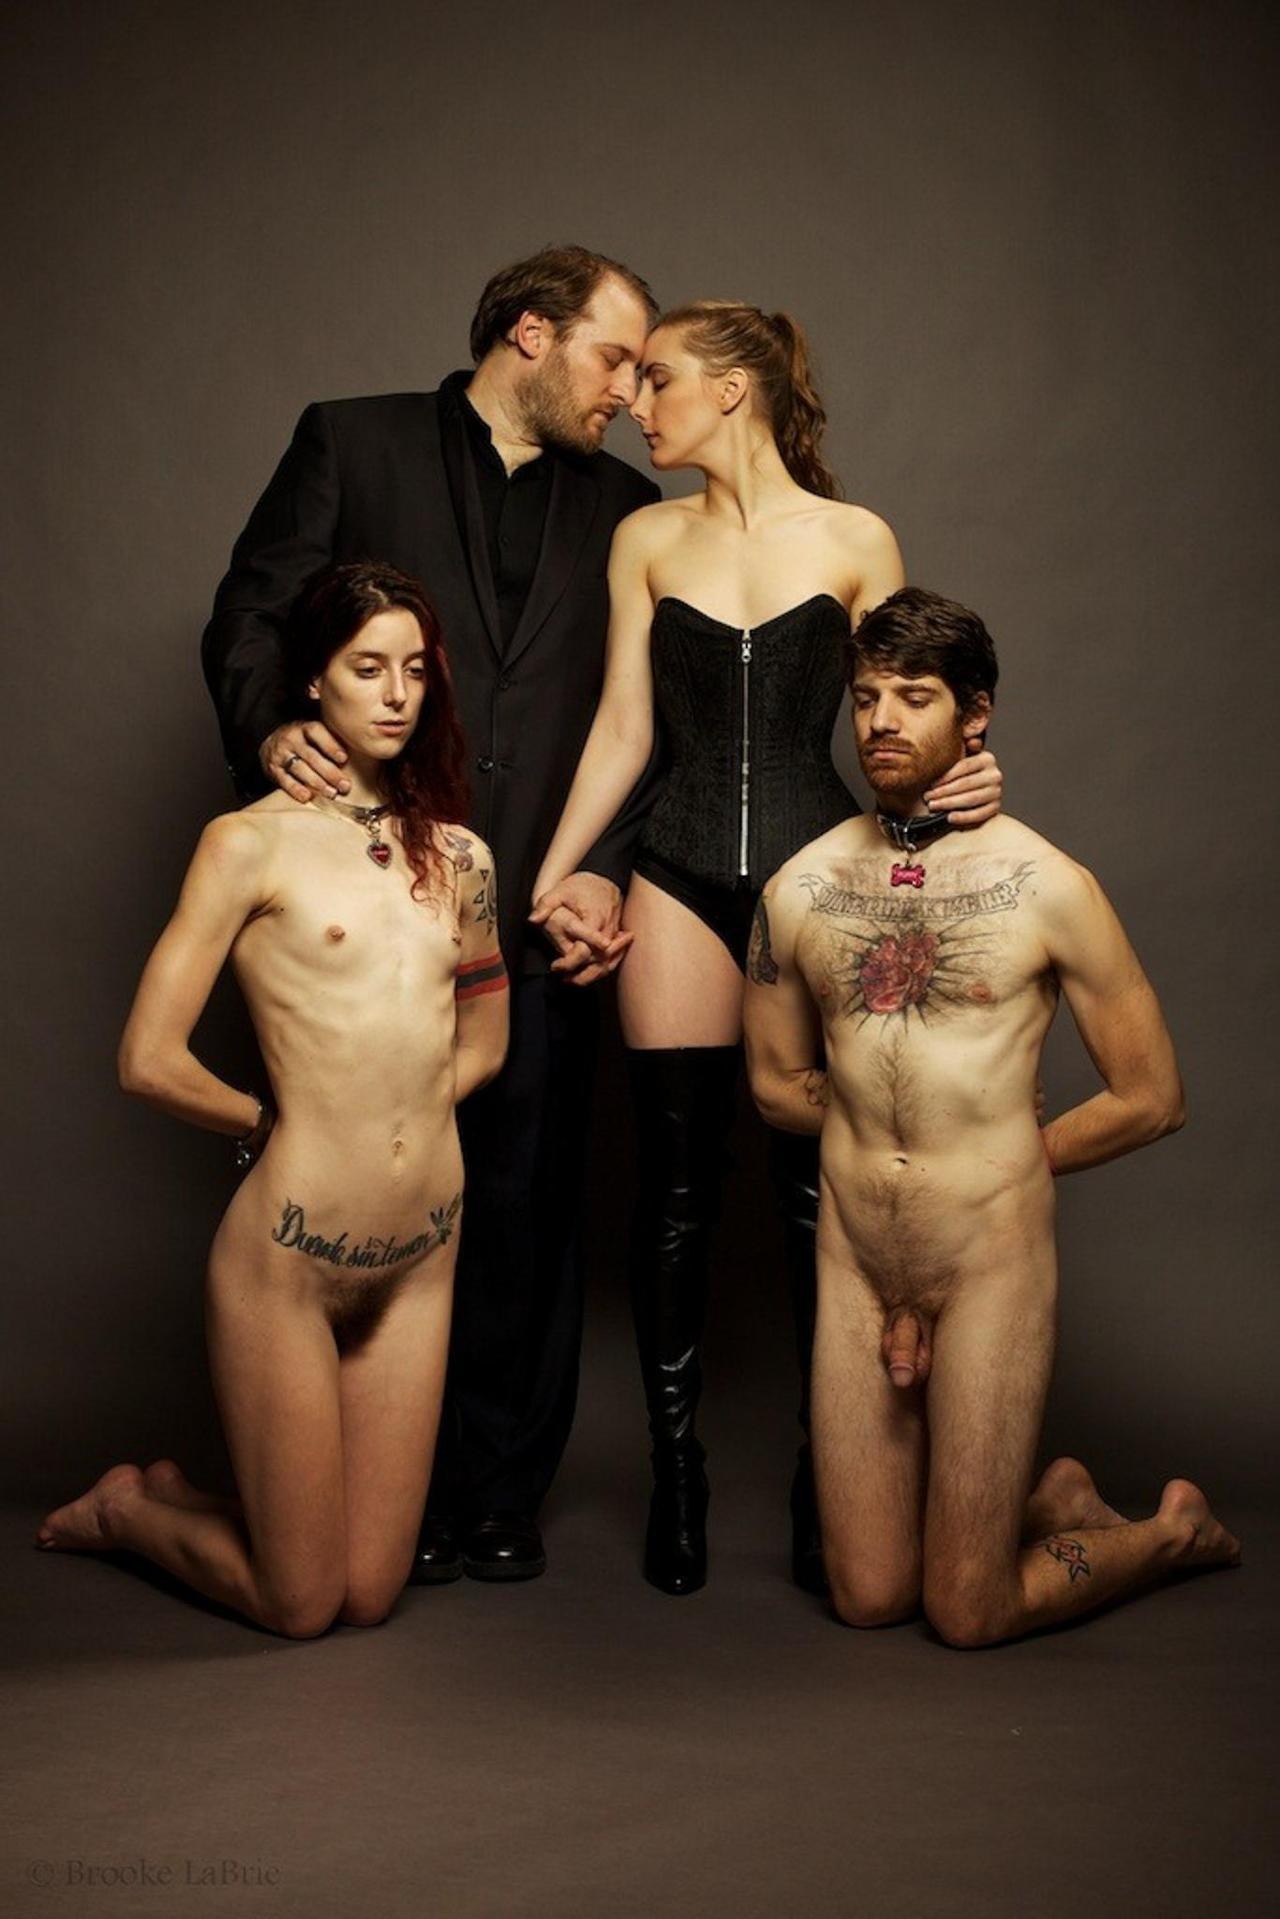 Bdsm three men and one woman relationship